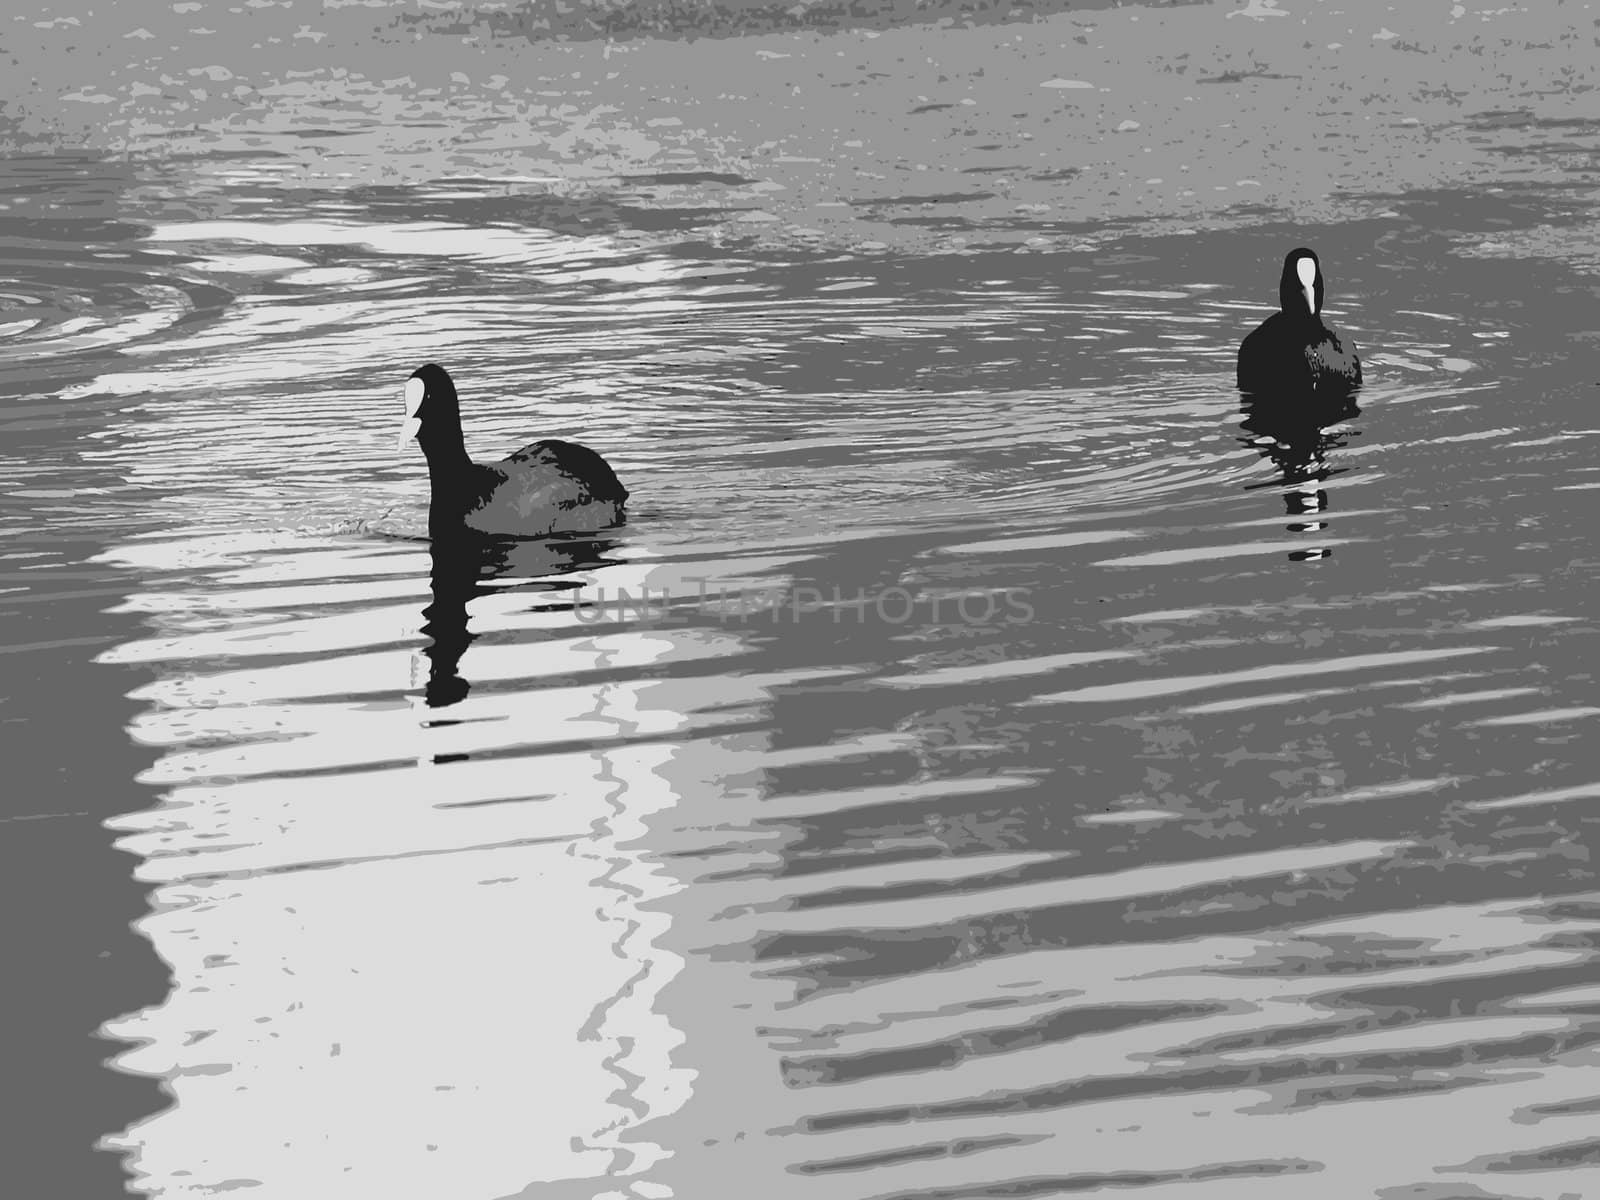 ducks swimming on water, vector grayscale composition; abstract art illustration